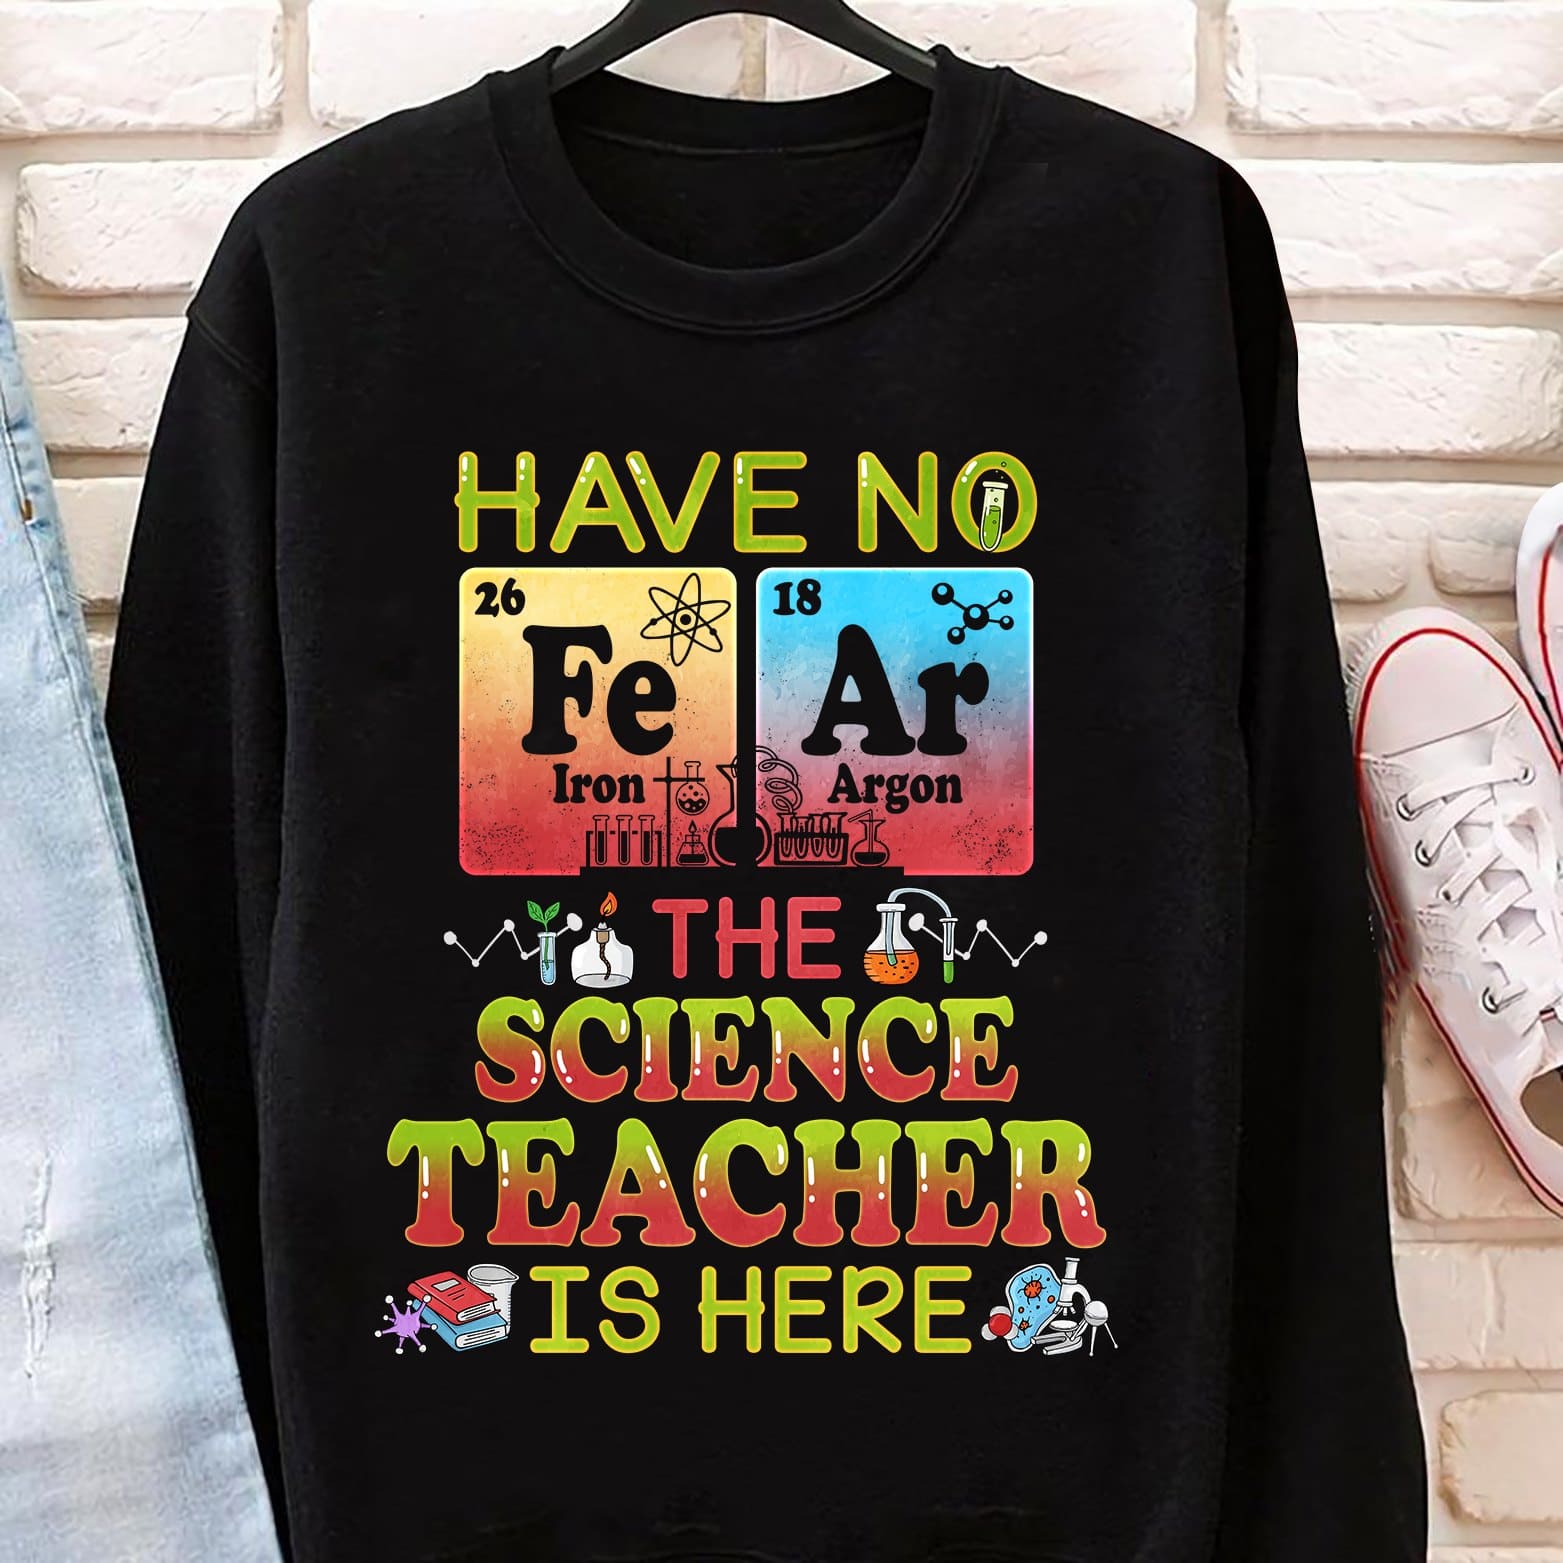 Chemical Element - Have no the science teacher is here